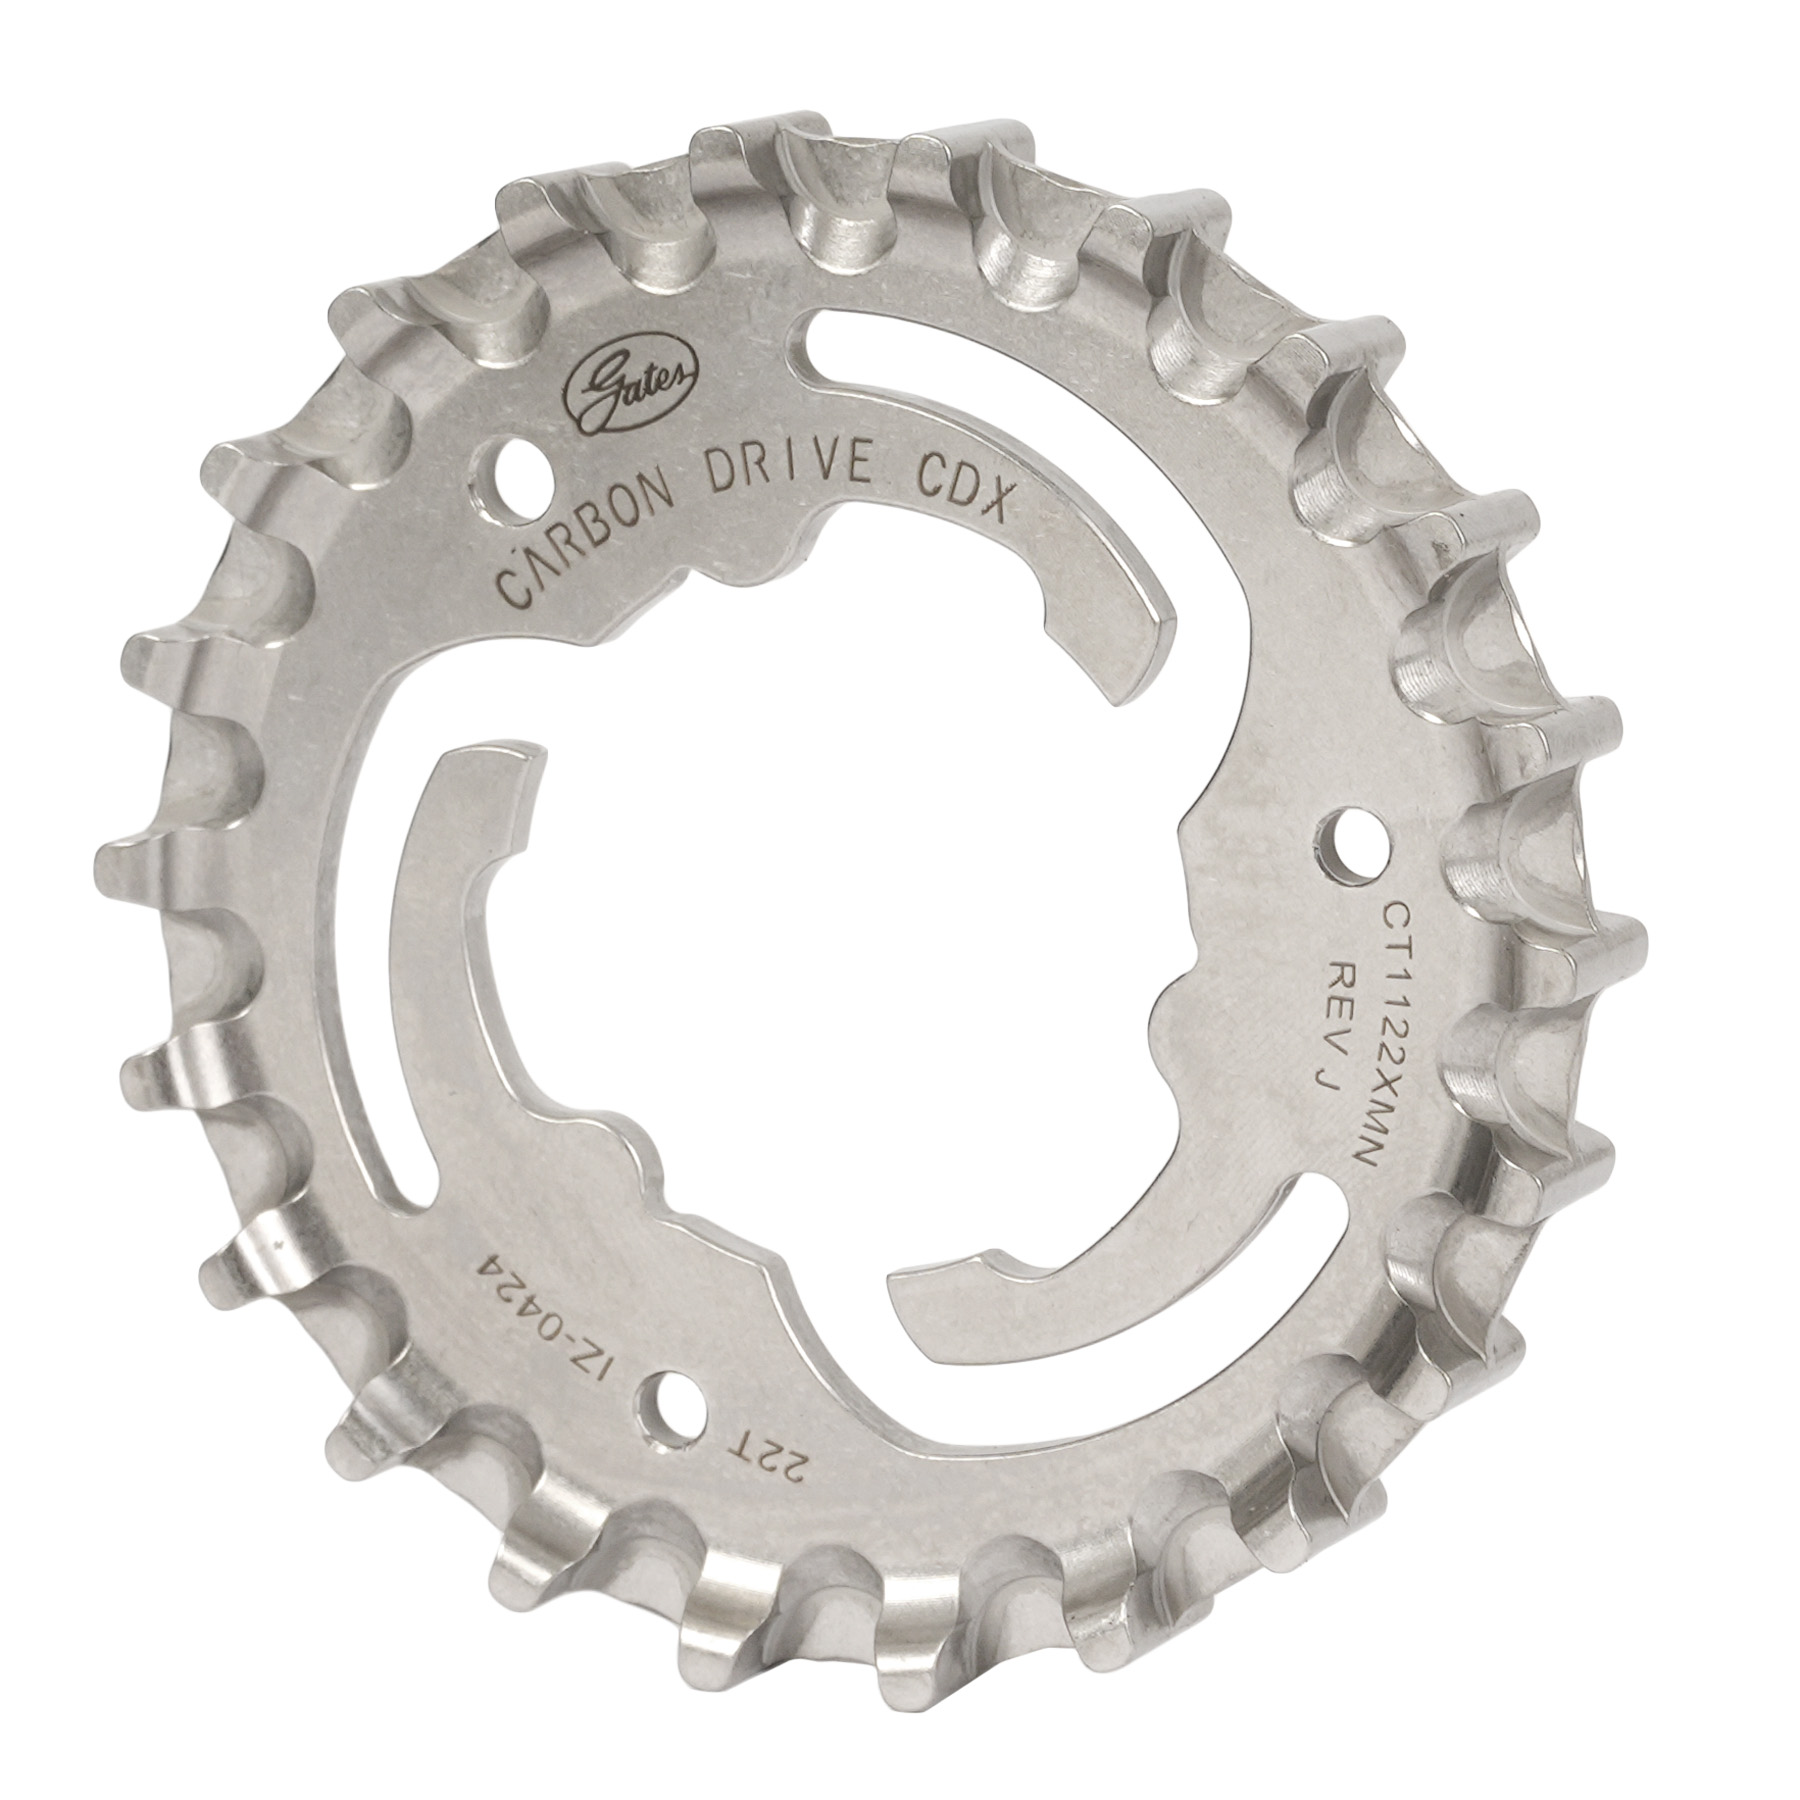 Picture of Gates Carbon Drive CDX Centertrack-Sprocket - Rear | Sure Fit / Shimano/Sram - stainless steel